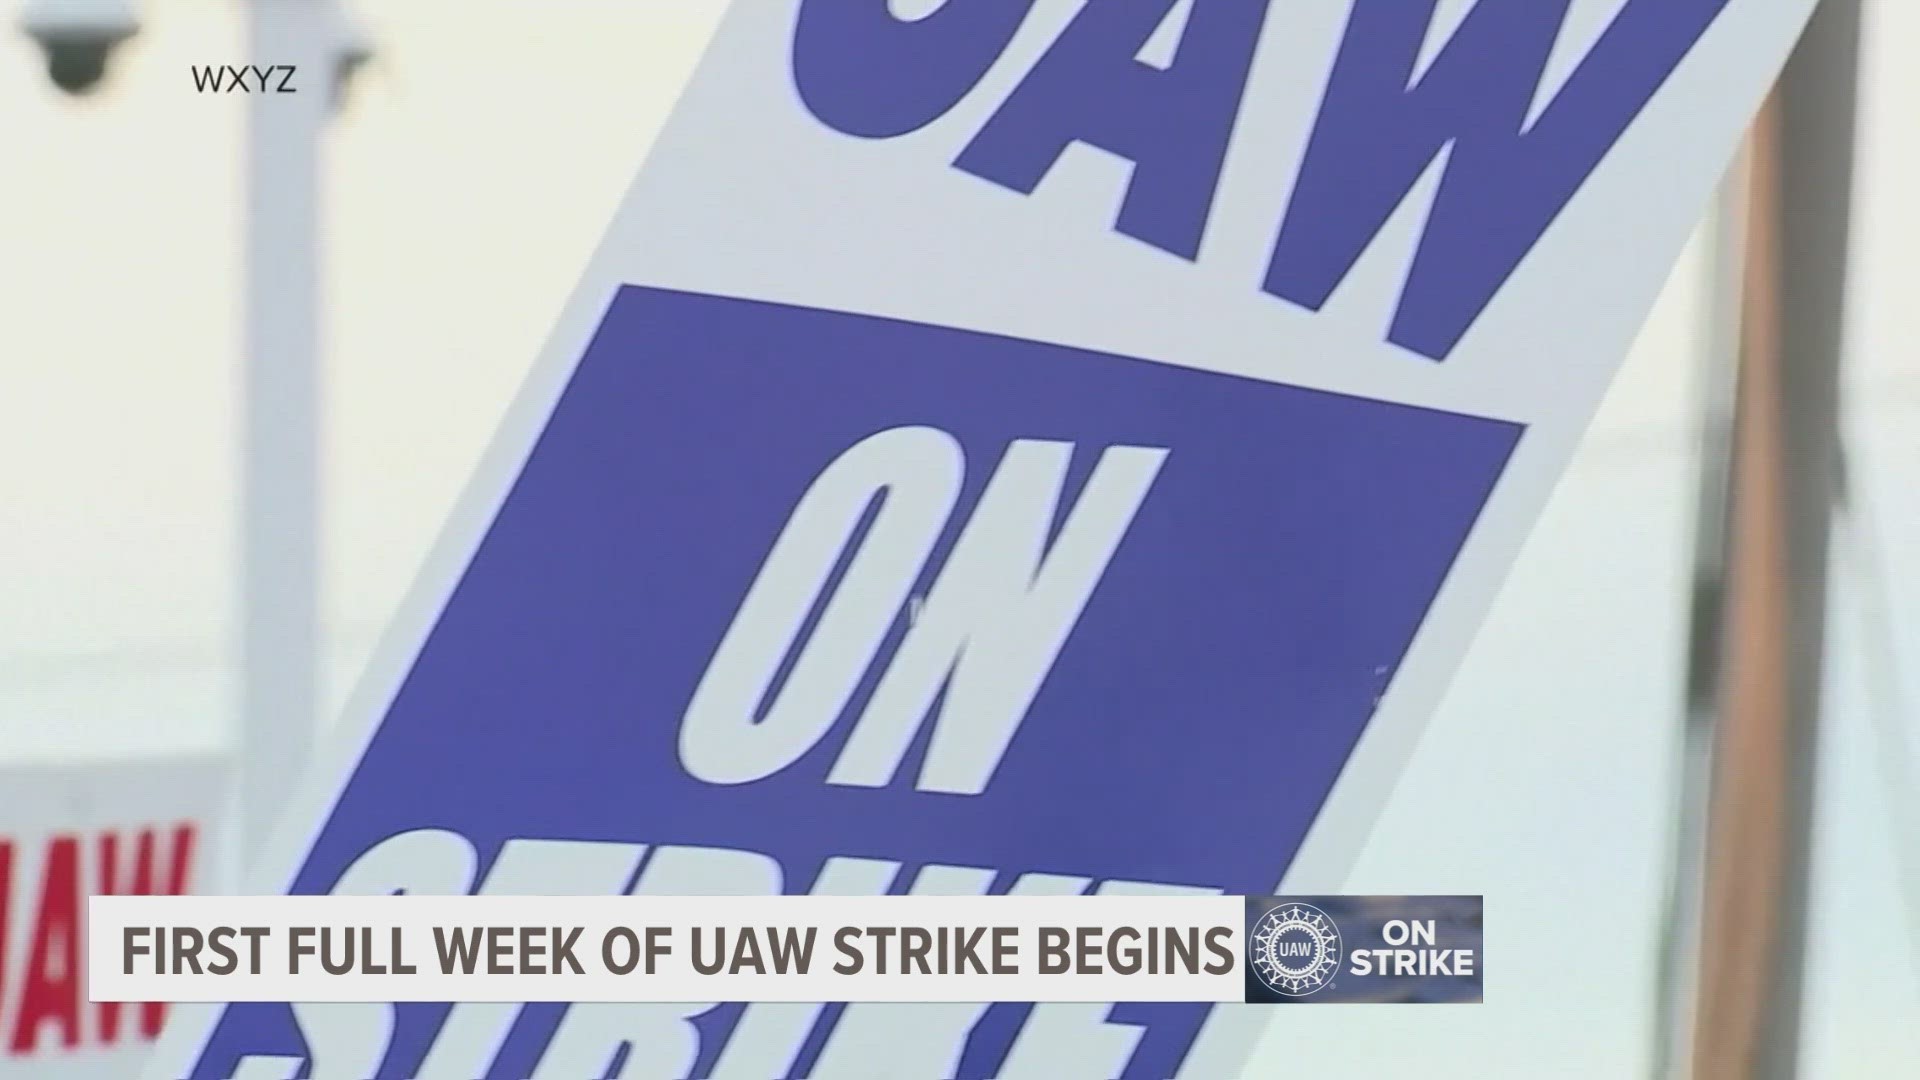 Around 13,000 U.S. auto workers hit the picket lines Friday after union negotiations with Detroit's three automakers failed to reach an agreement on new contracts.